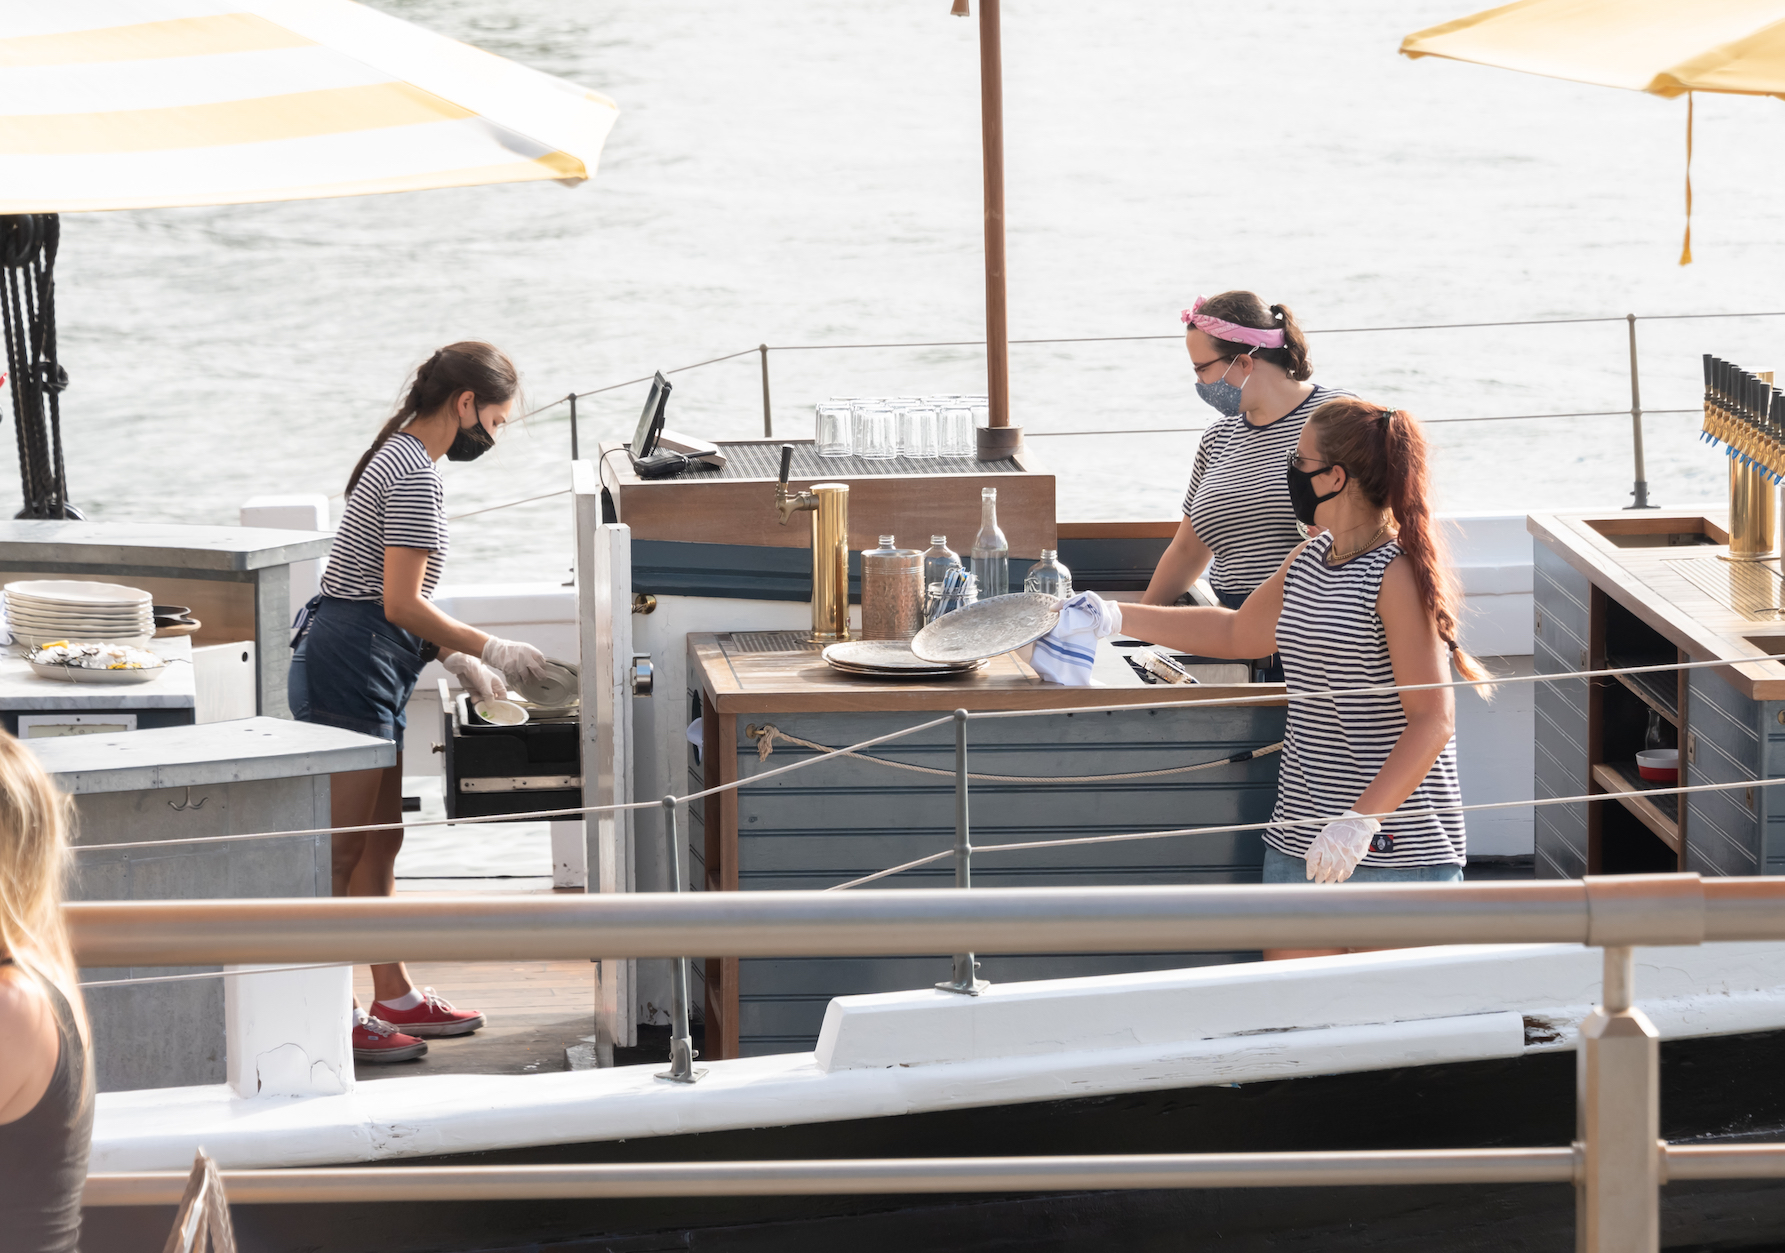 Bartenders work on the Grand Banks boat restaurant at Pier 25 as the city continues Phase 4 of re-opening following restrictions imposed to slow the spread of coronavirus